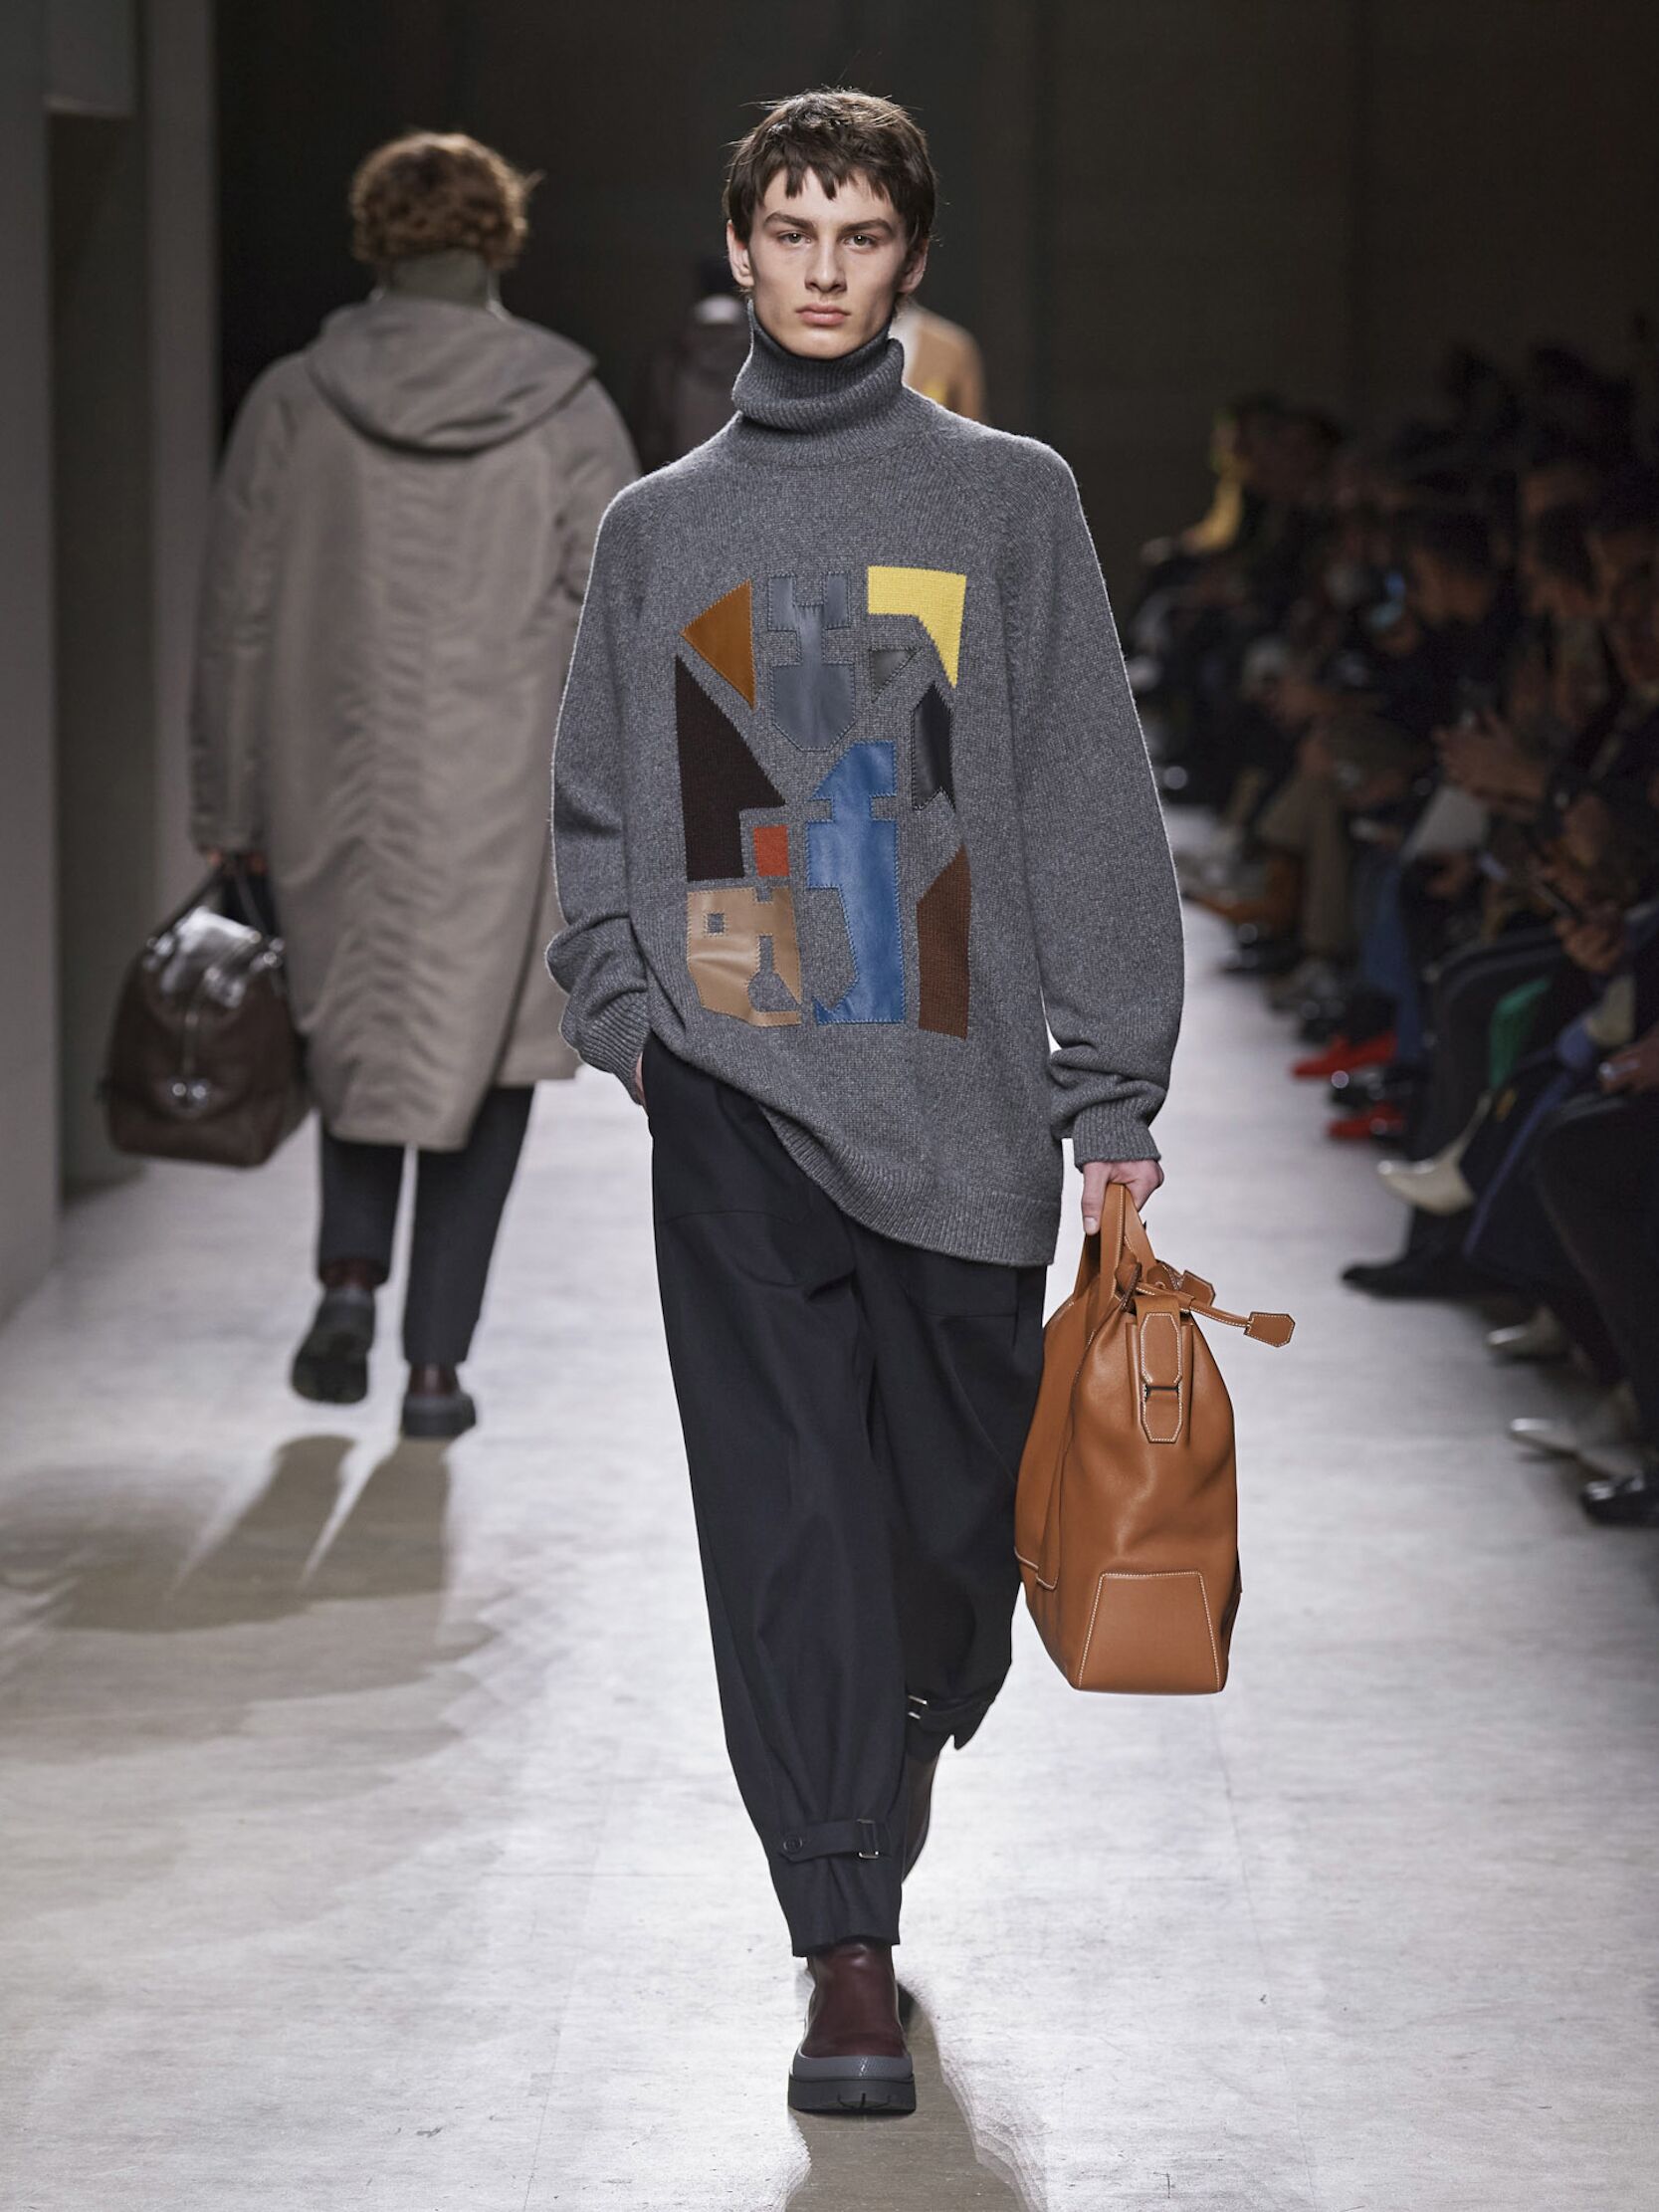 New Hermès Colors For Fall 2019/Winter 2020 – Madison Avenue Couture